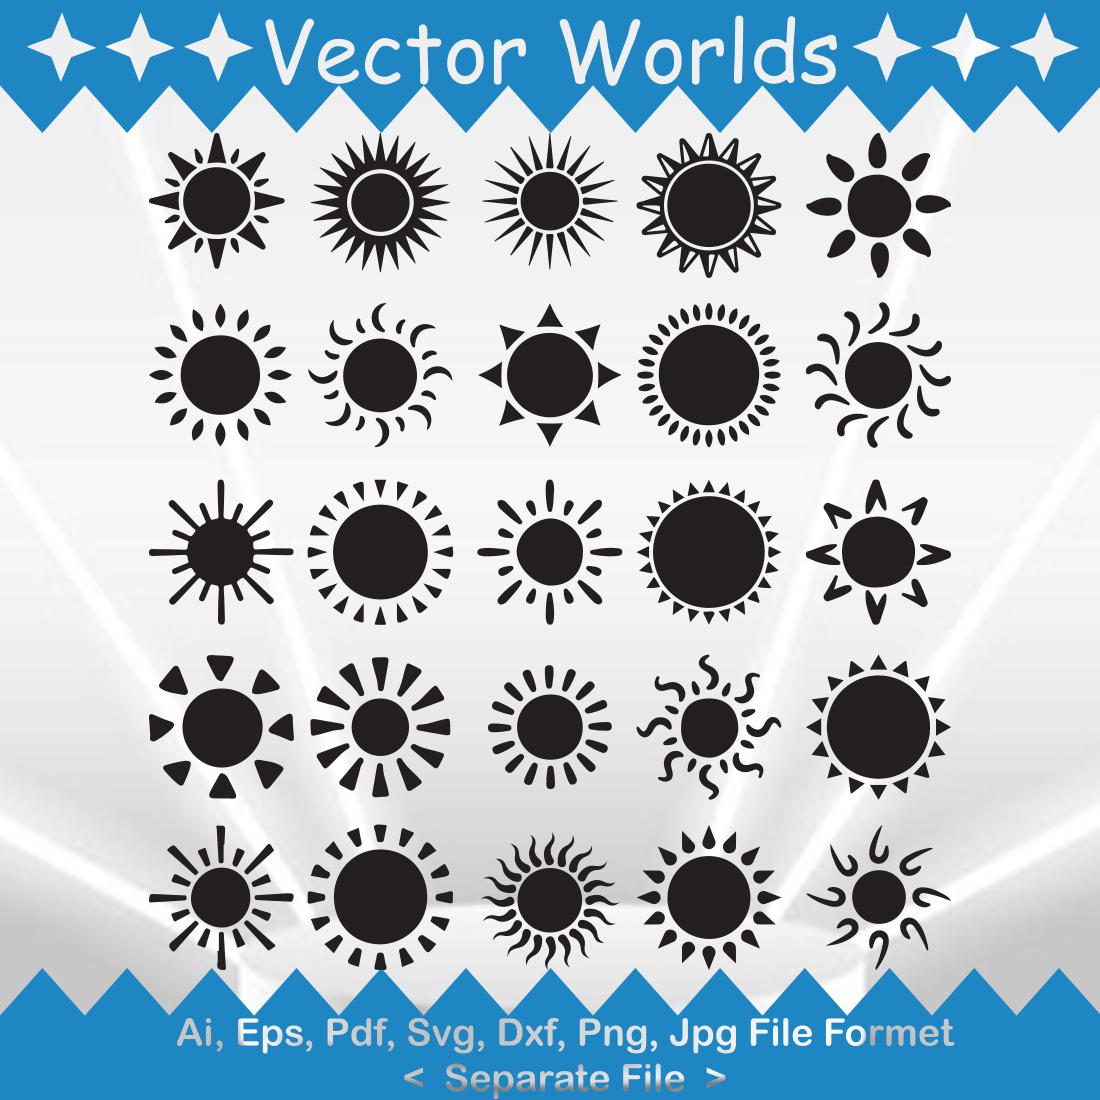 Pack of vector amazing images of silhouettes of the sun.